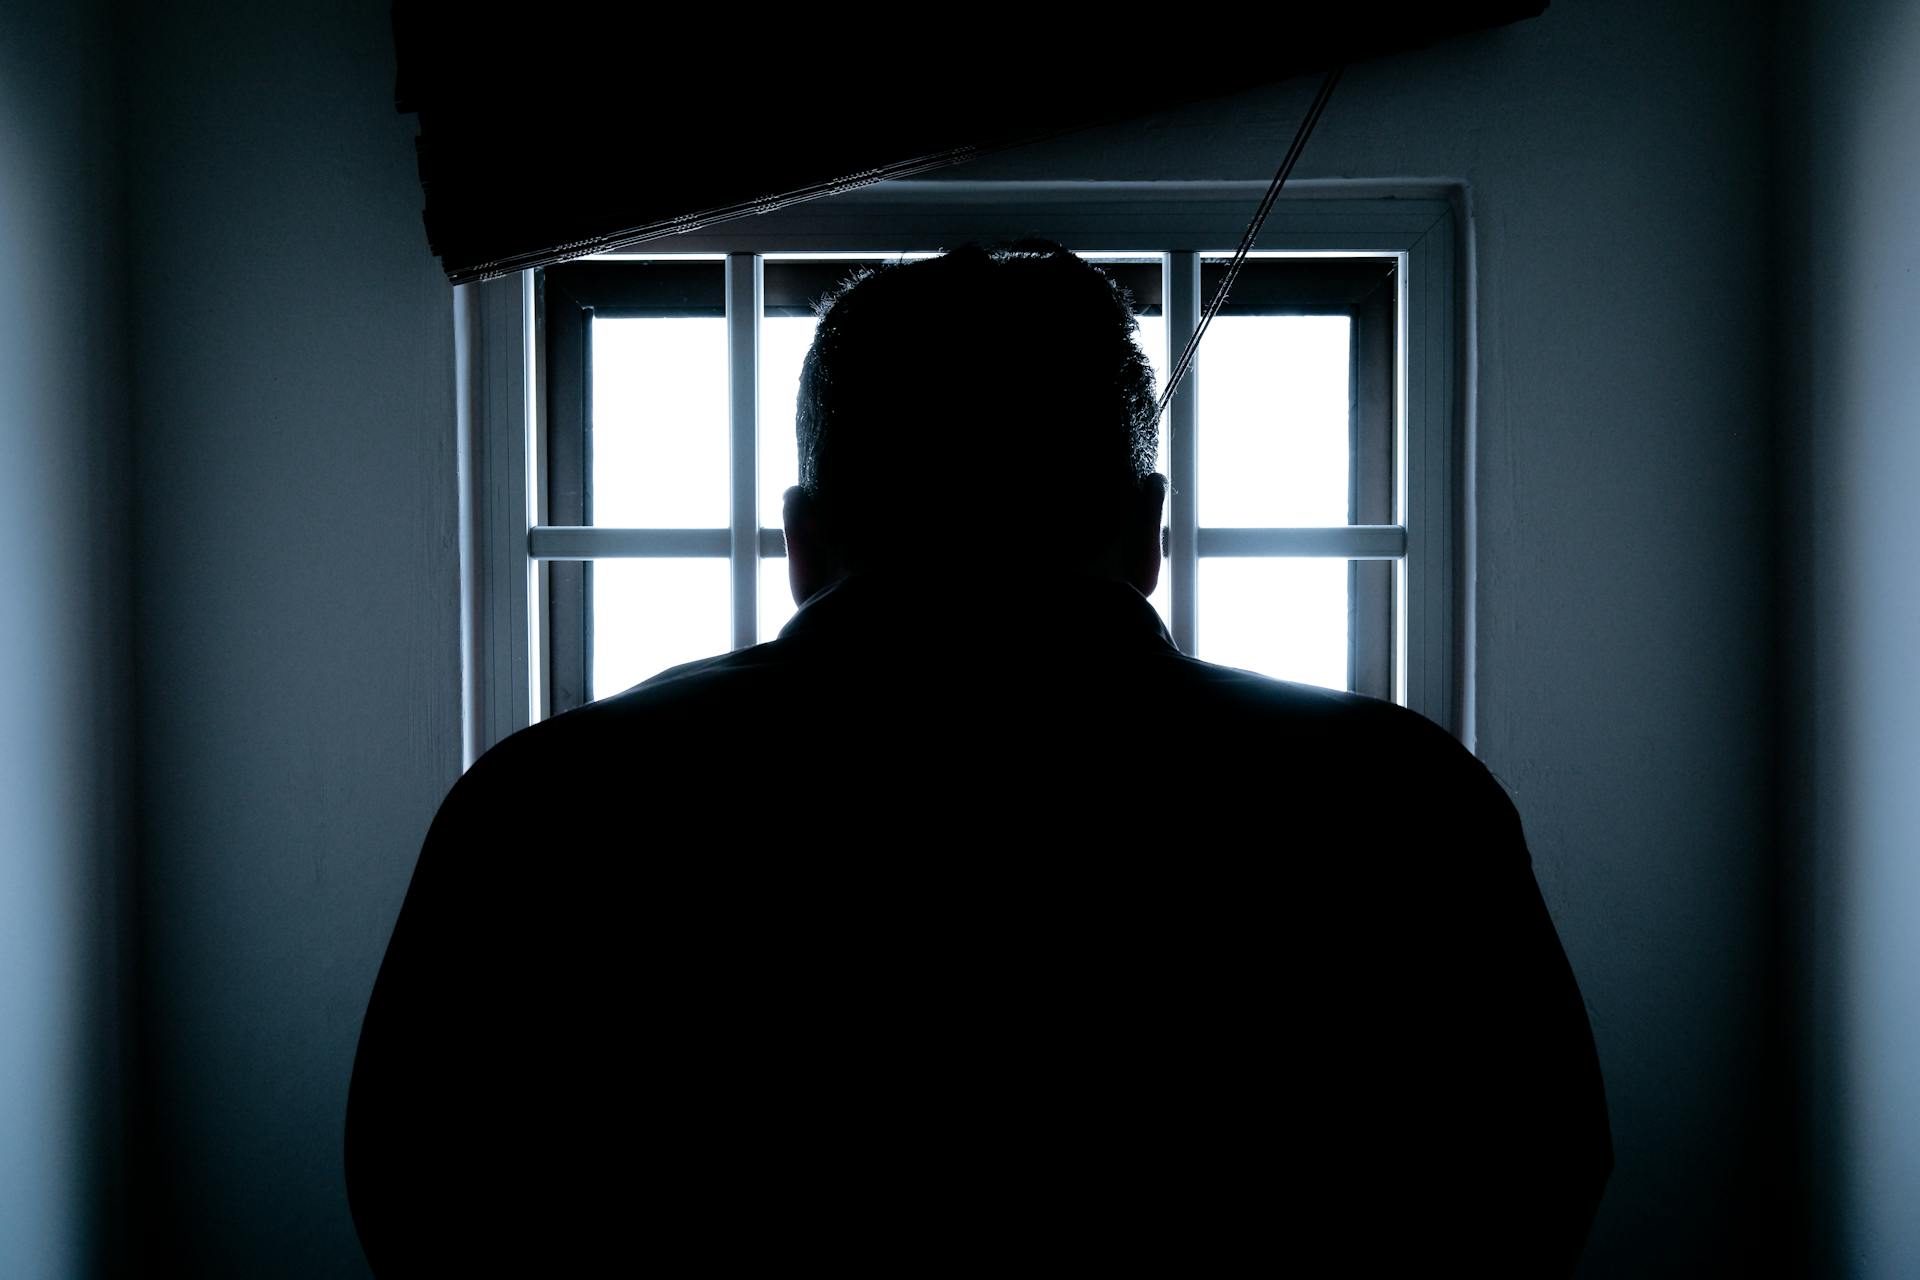 A silhouette of a man sitting in jail | Source: Pexels